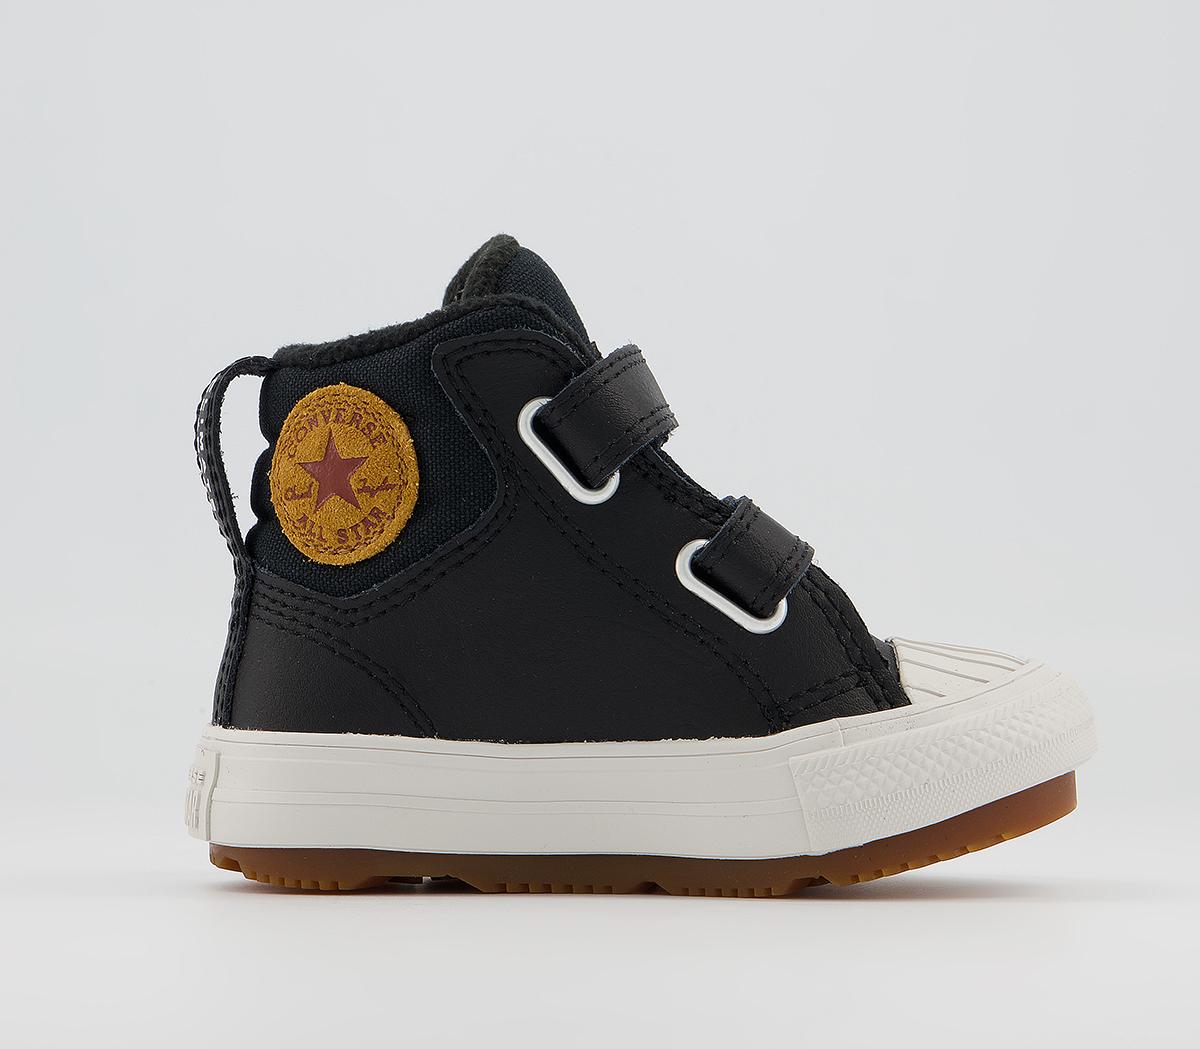 ConverseAll Star Berkshire Boot 2v Infant TrainersBlack Black Pale Putty